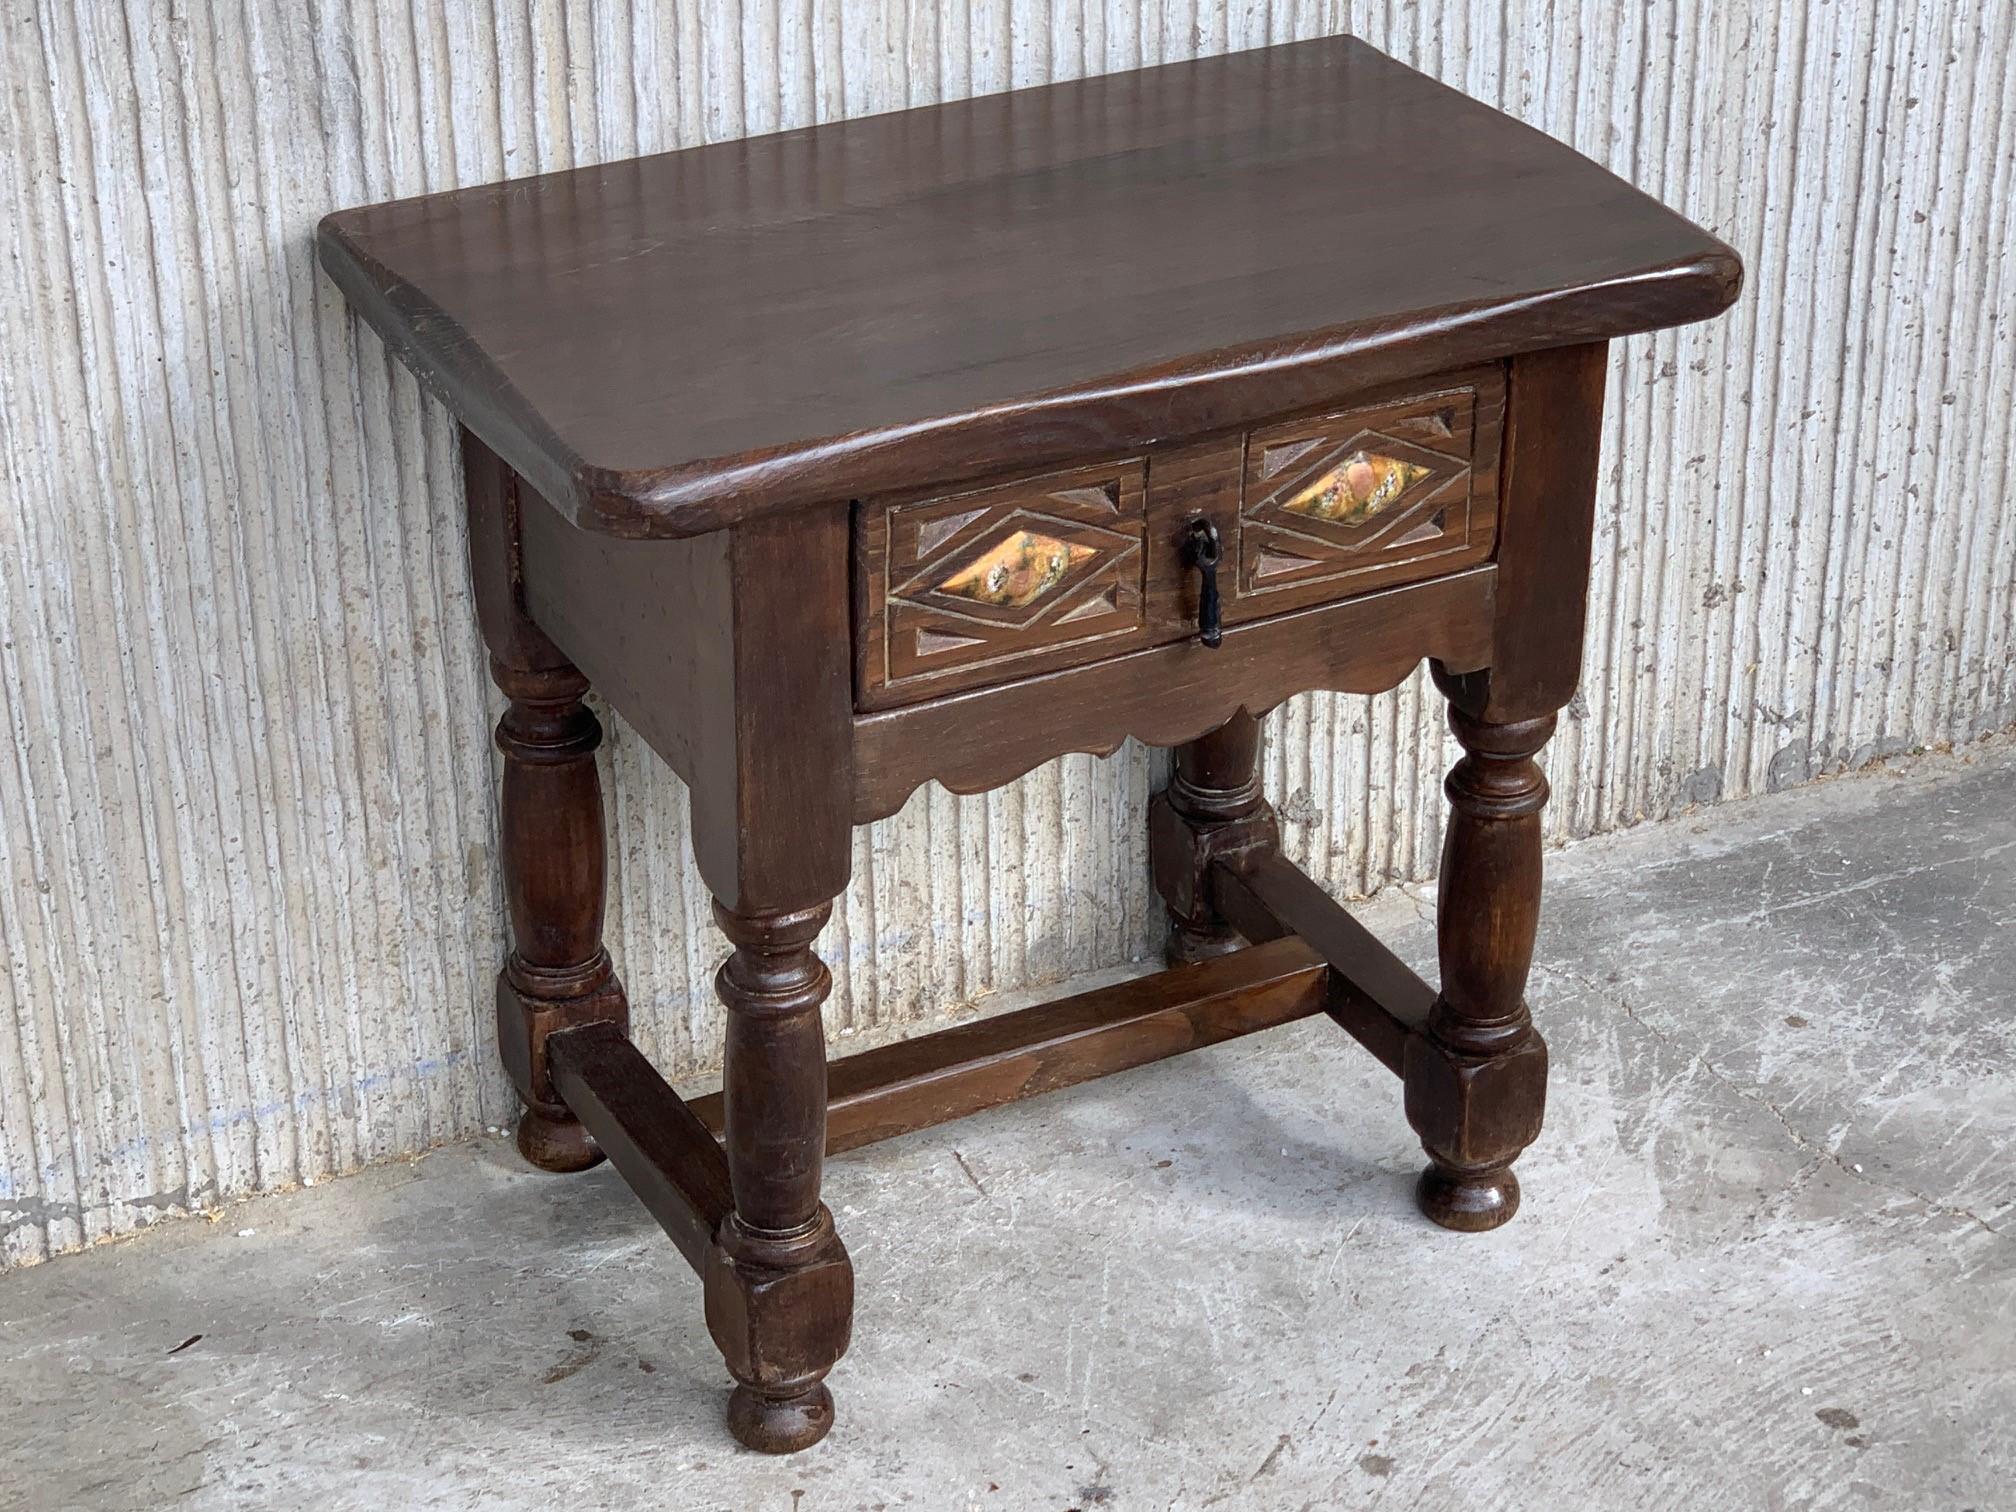 20th century pair of Spanish nightstands with drawer and iron hardware.
Beautiful tables that you can use like a nightstands or side tables, end tables, or table lamp.